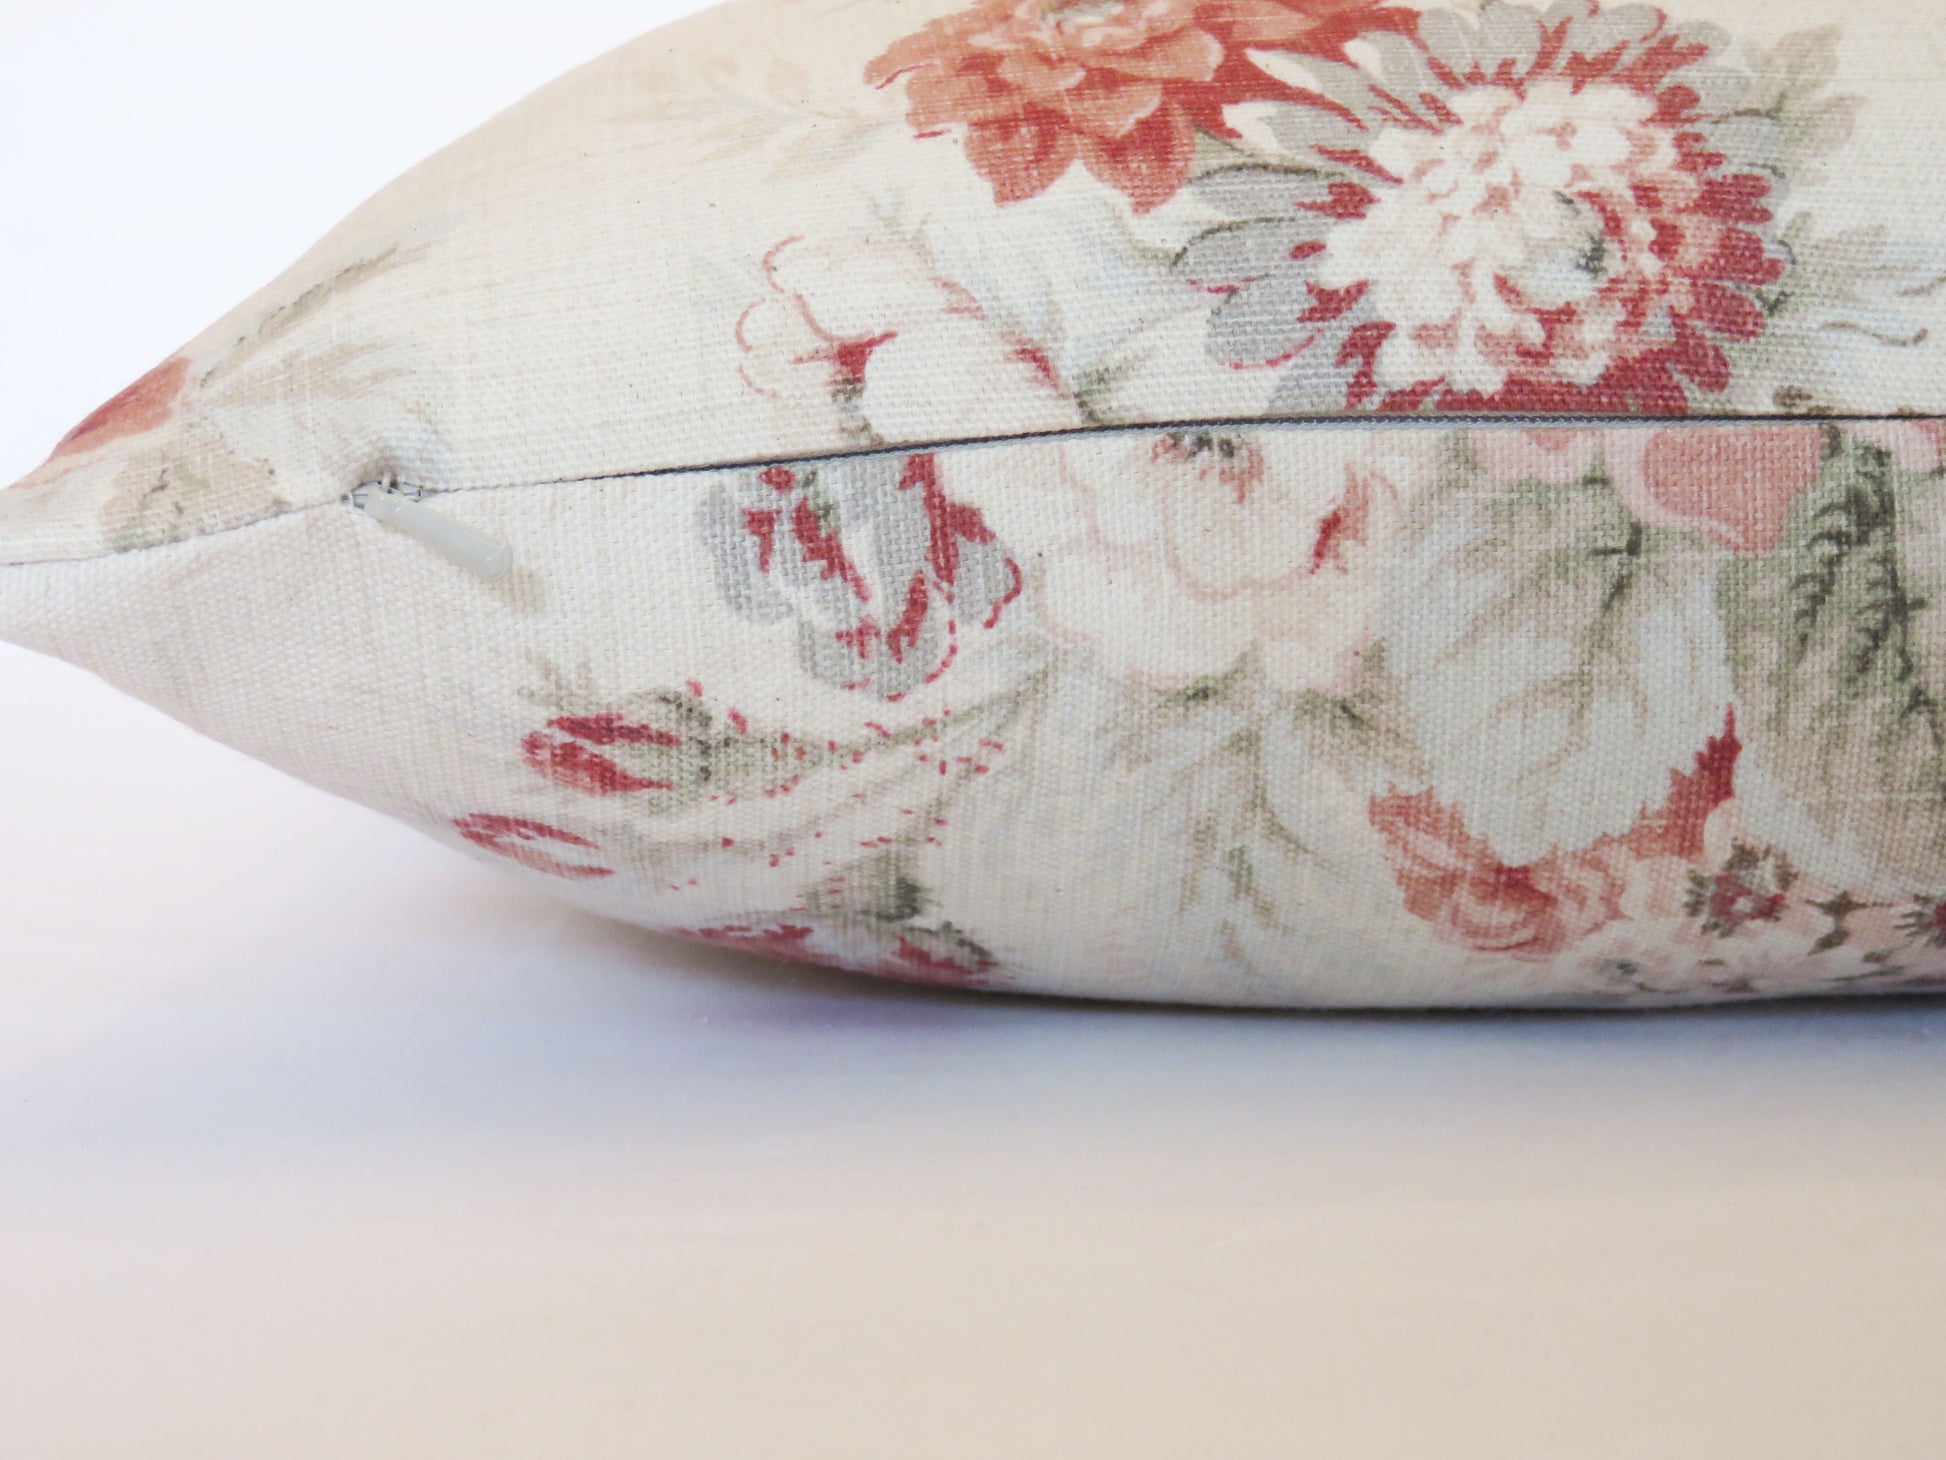 norfolk rose pillow cover in vintage colorway with dusty pink, grey, blue